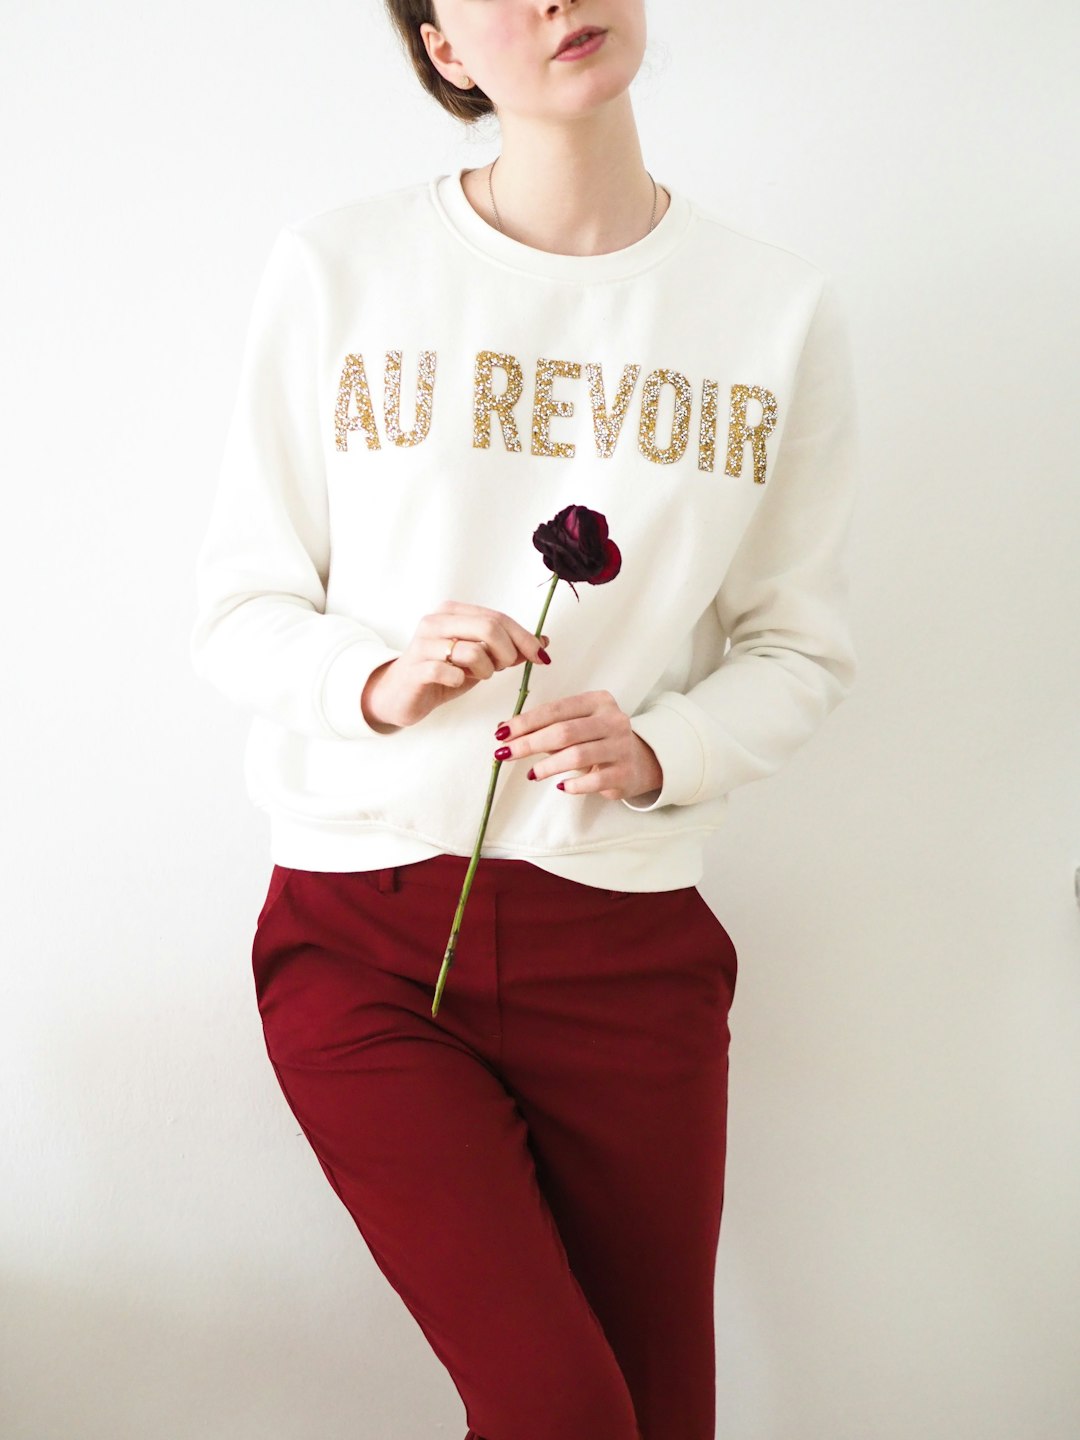 woman in white sweater and red pants holding black and white lollipop